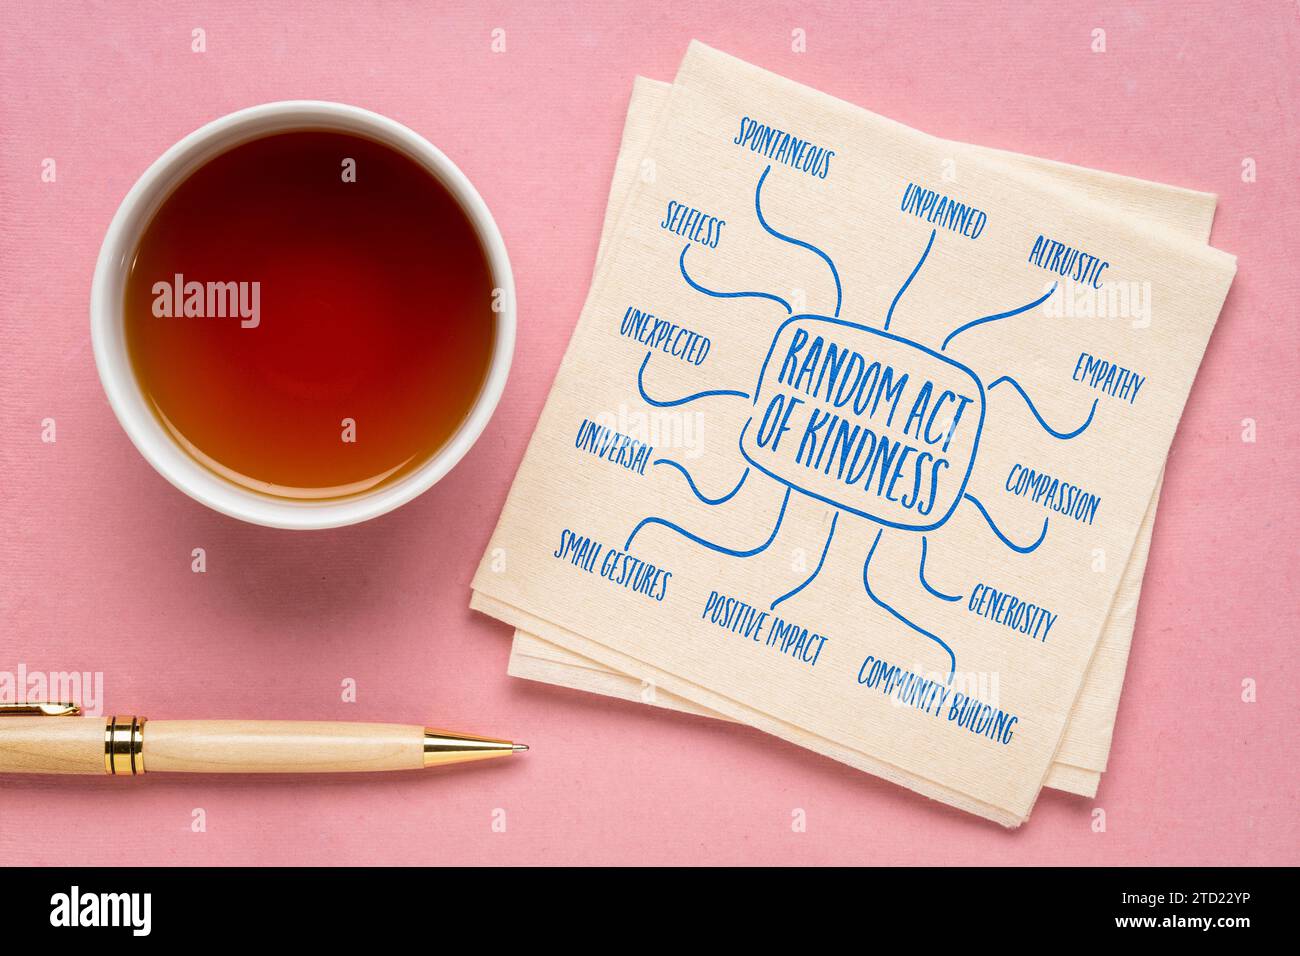 random act of kindness - infographics or mind map sketch on a napkin with tea, spontaneous compassion concept Stock Photo